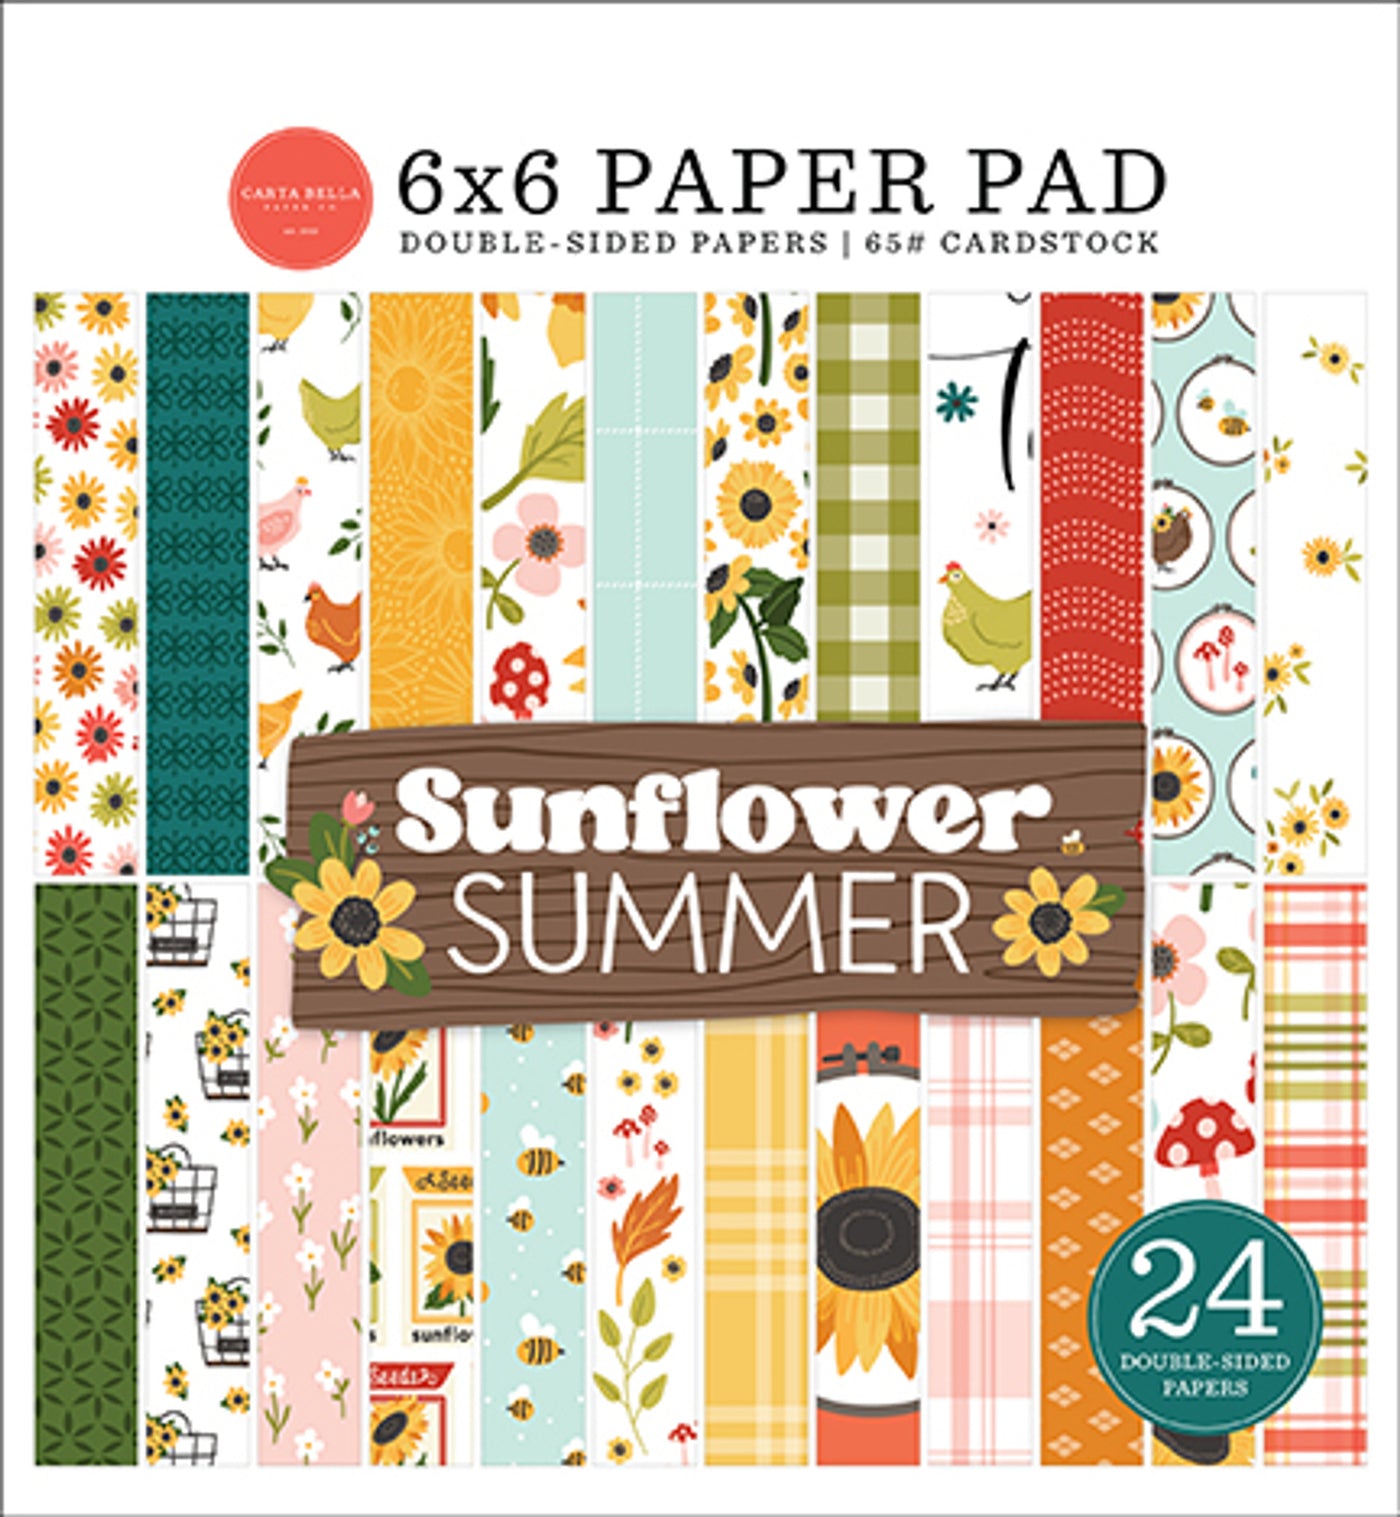 6x6 Sunflower Summer pad with 24 double-sided sheets. Great for summertime card making and other happy craft projects. From Carta Bella Paper Co.